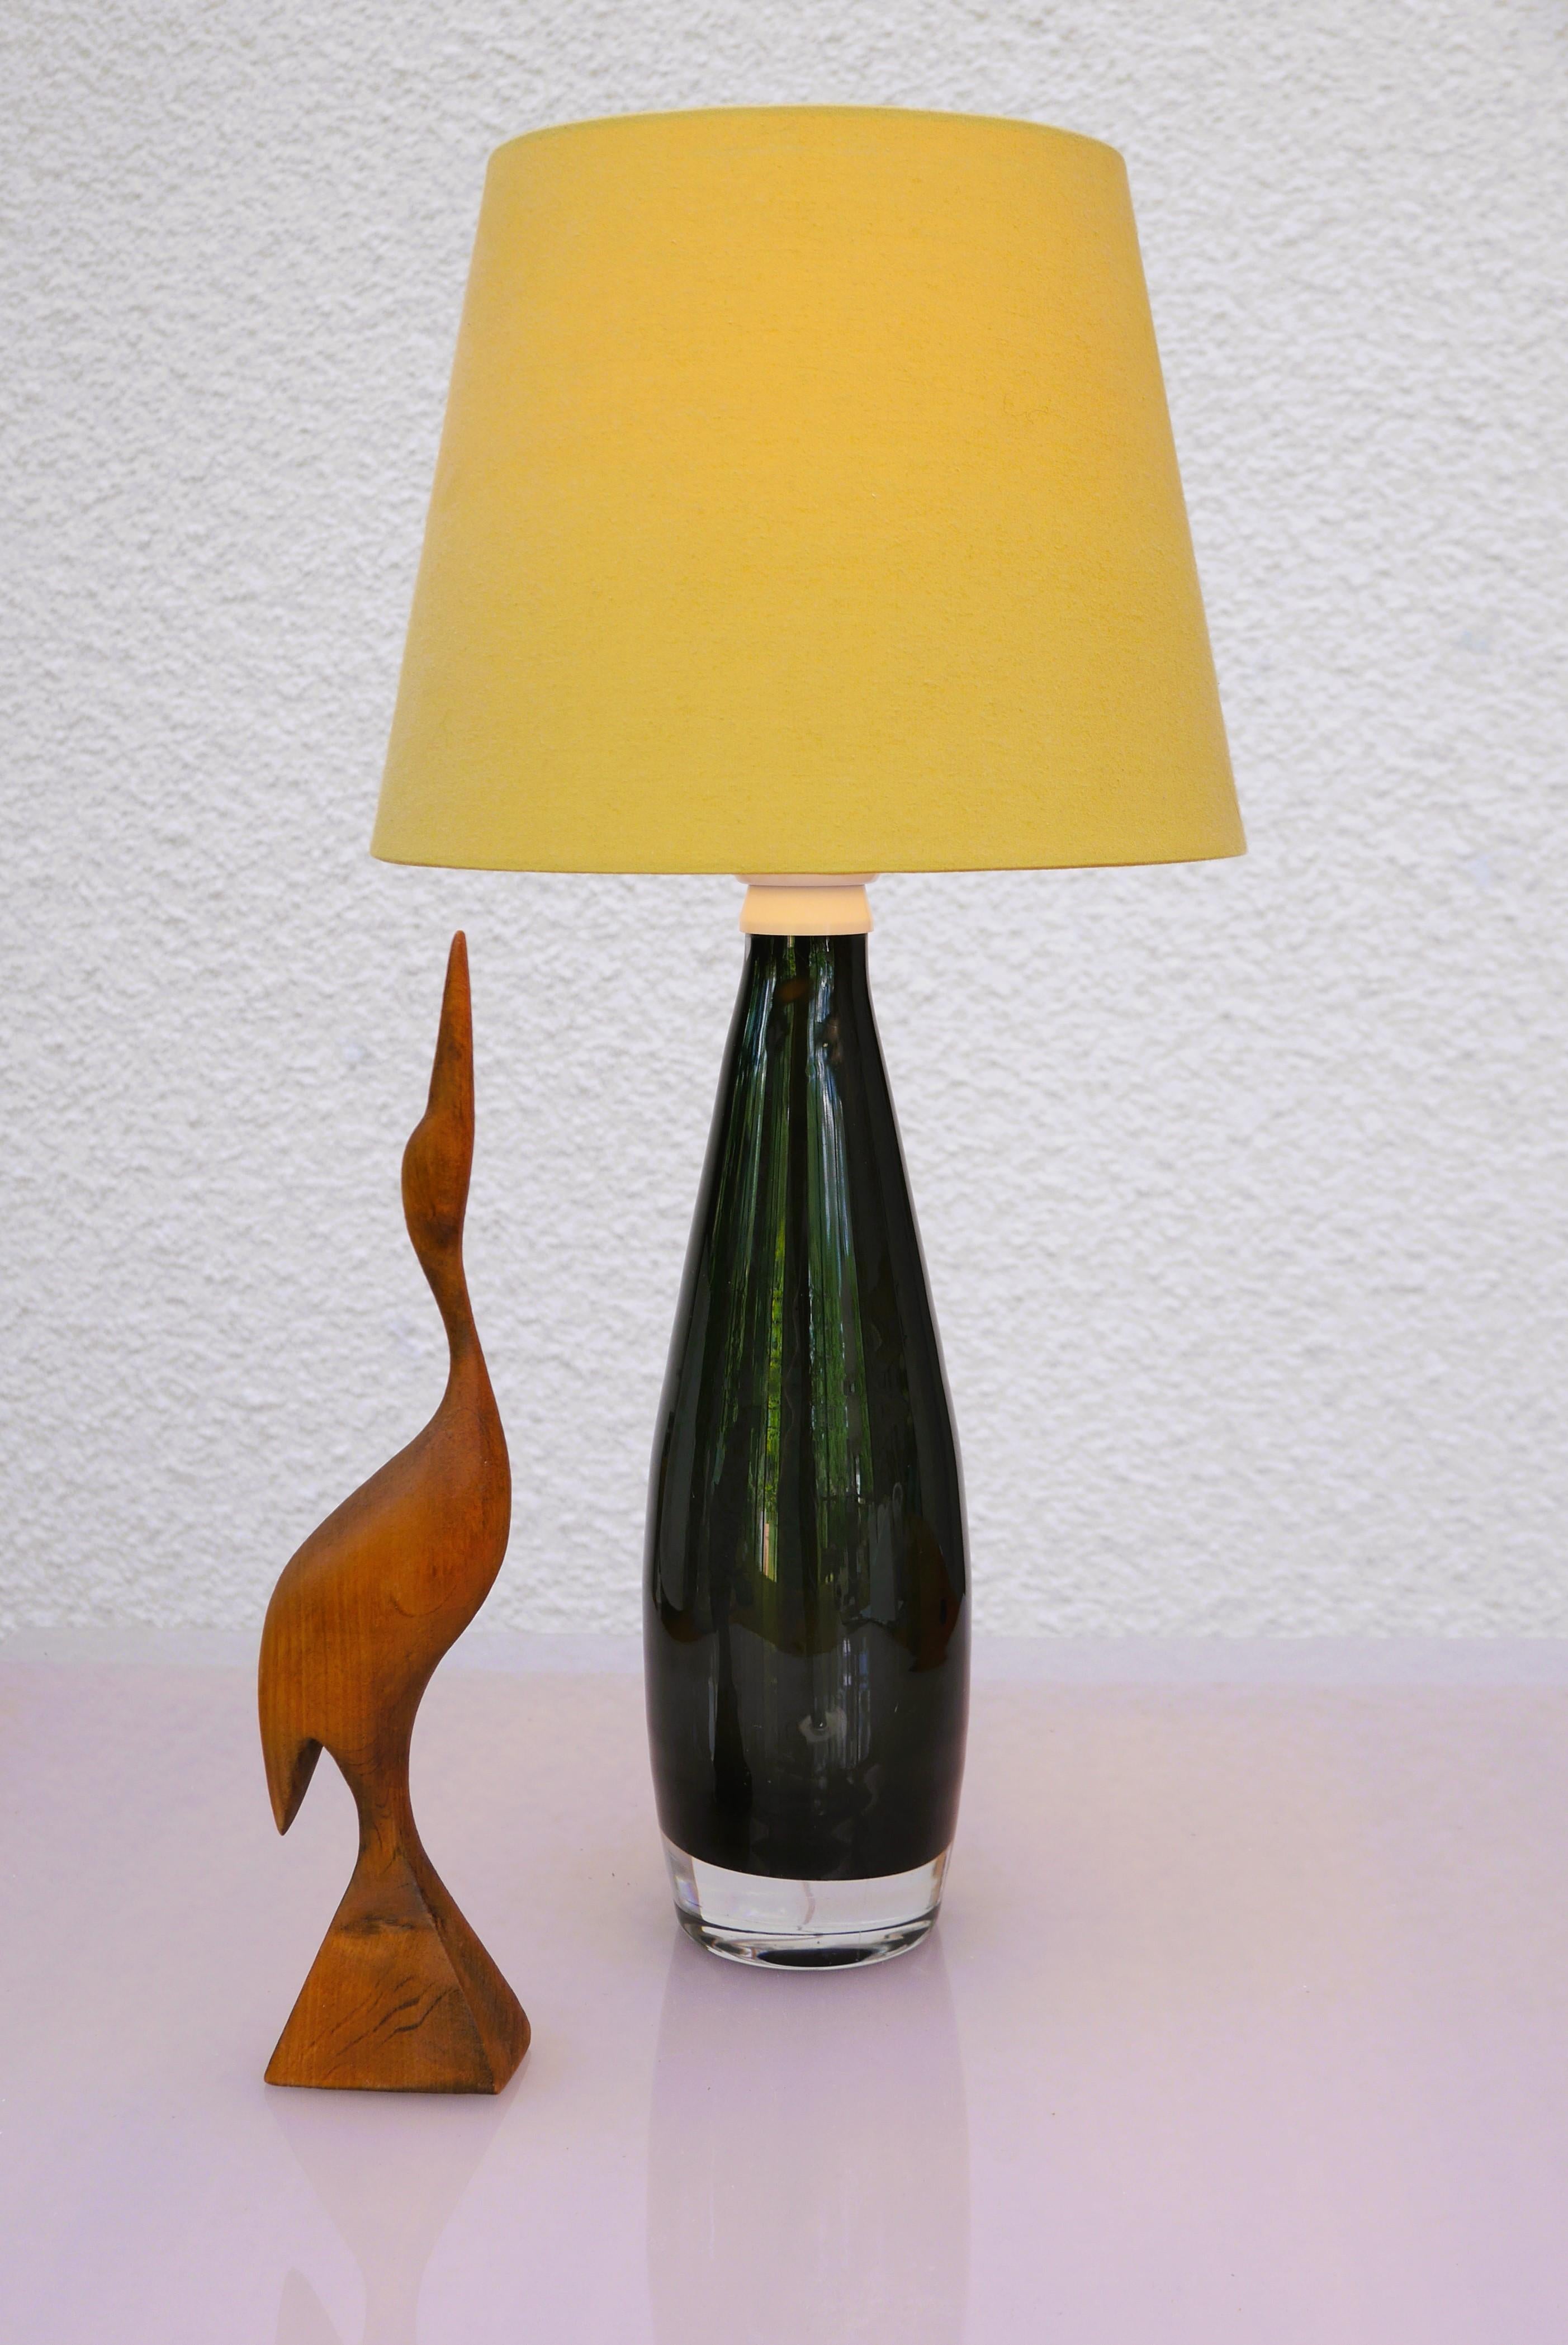 A rather large and gorgeous vintage glass table lamp, handmade and signed by Ove Sandberg for Kosta, Sweden. The price includes FREE shipping. A sommerso glass lamp base several layers of glass has been used with a contrasting dark color on the